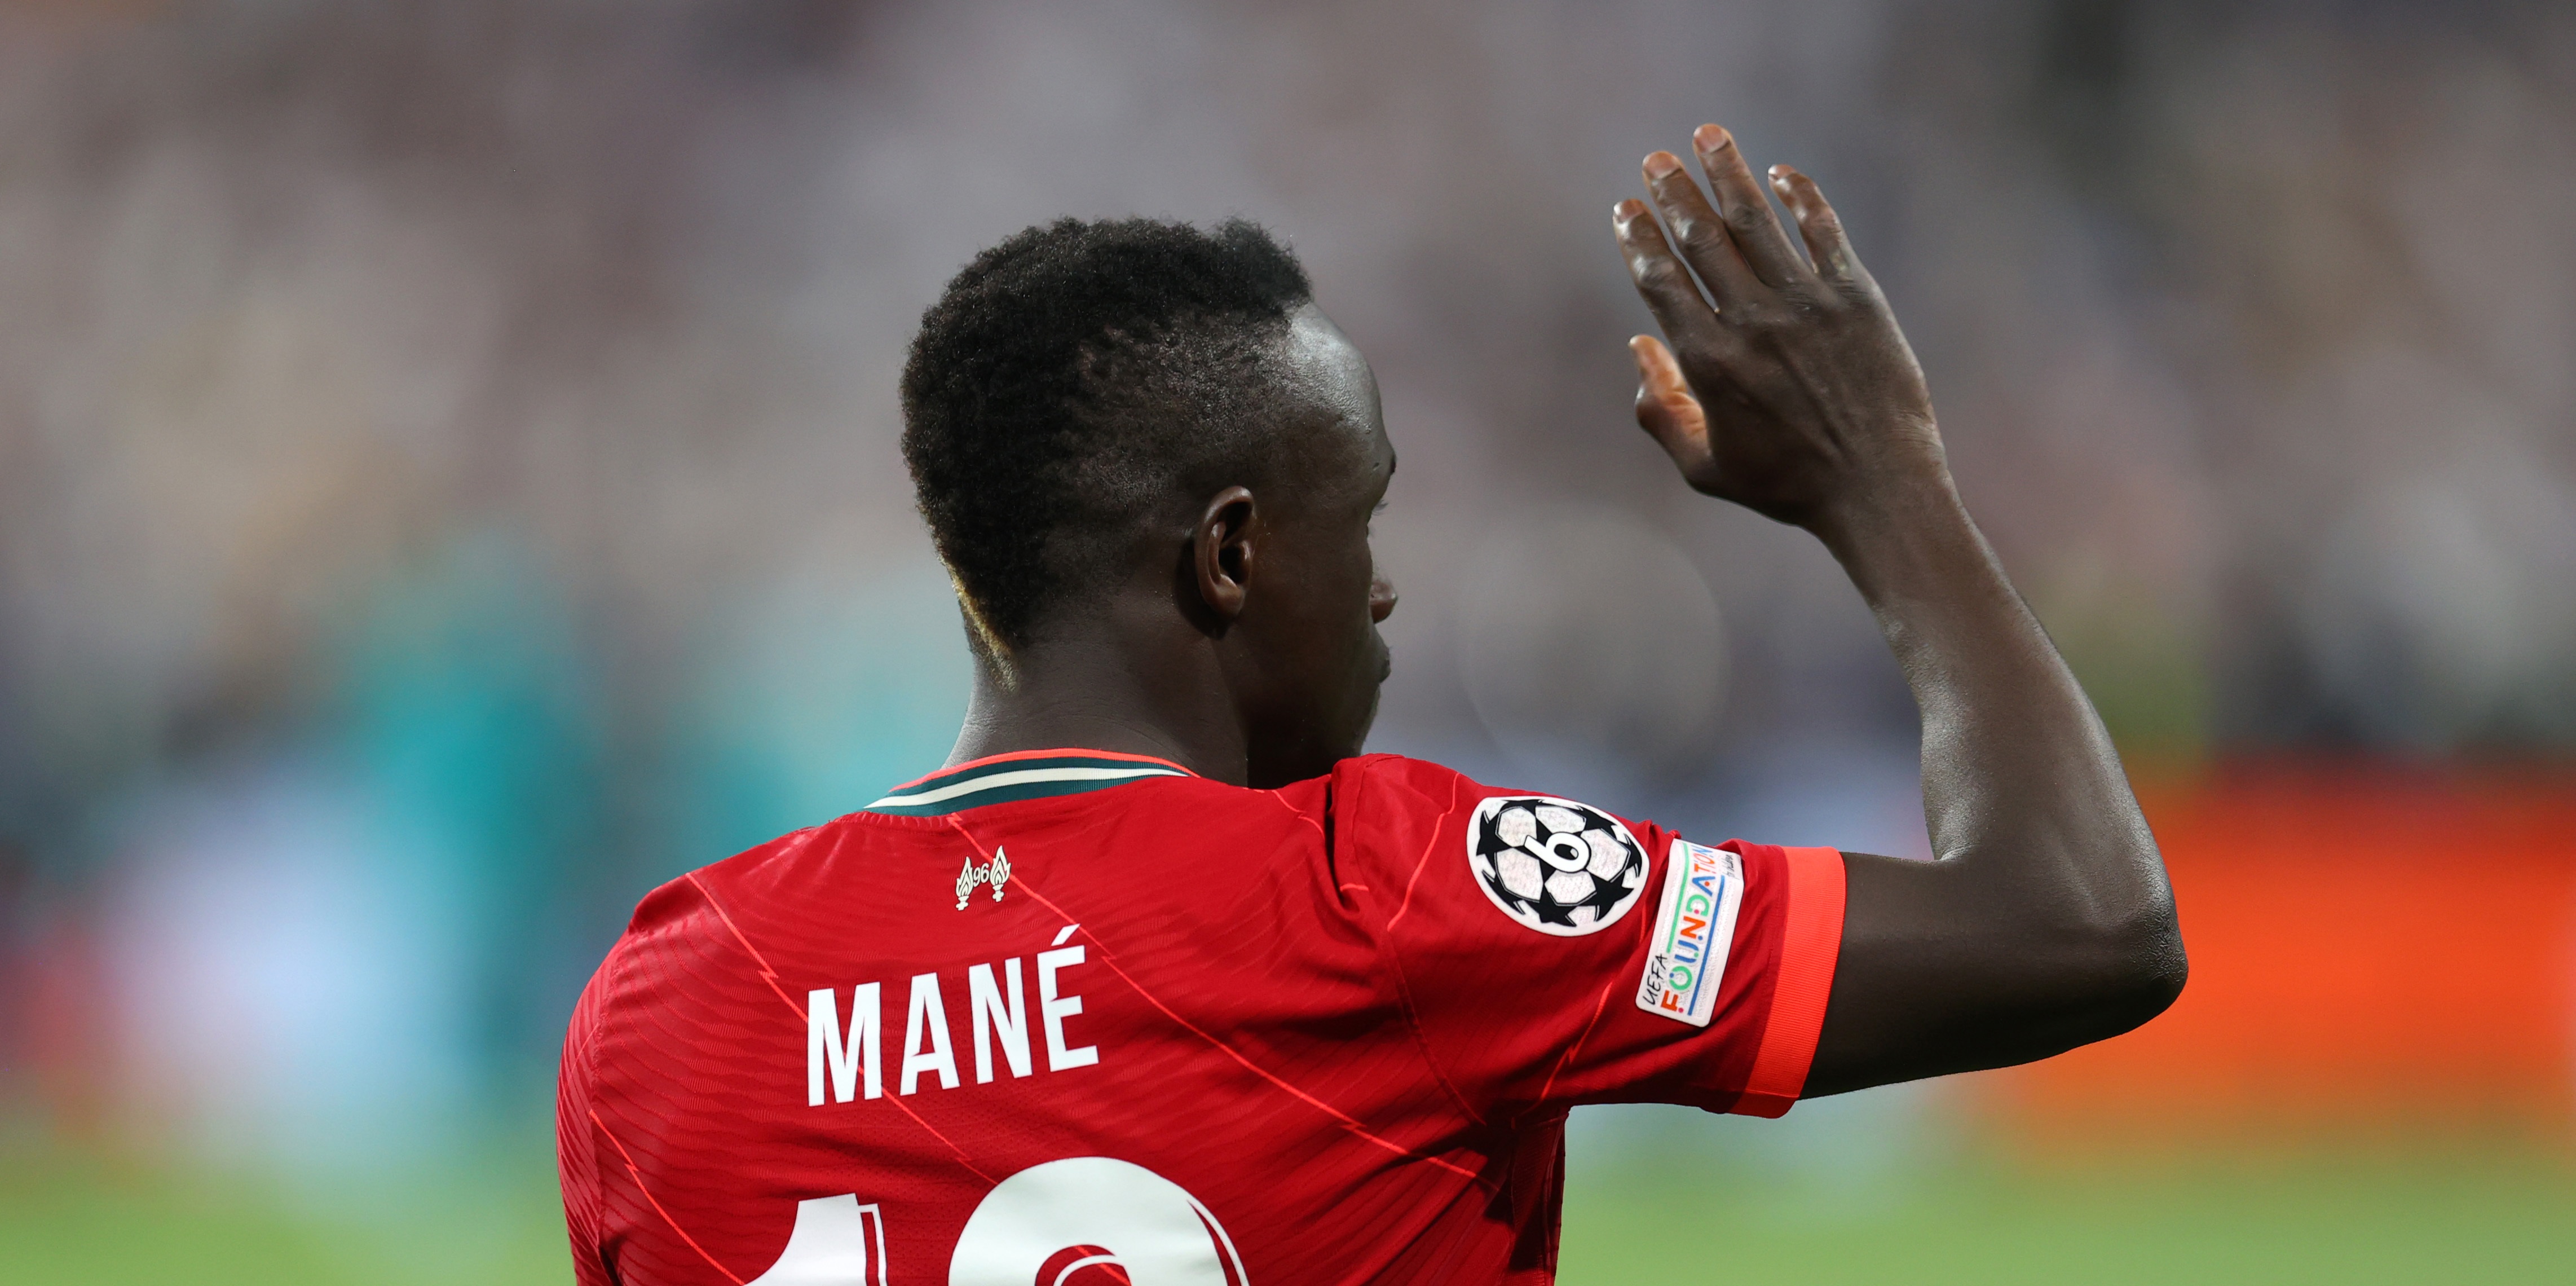 Bayern sporting director shares six-word Mane message as Liverpool star set to join Bundesliga in £27.5m deal